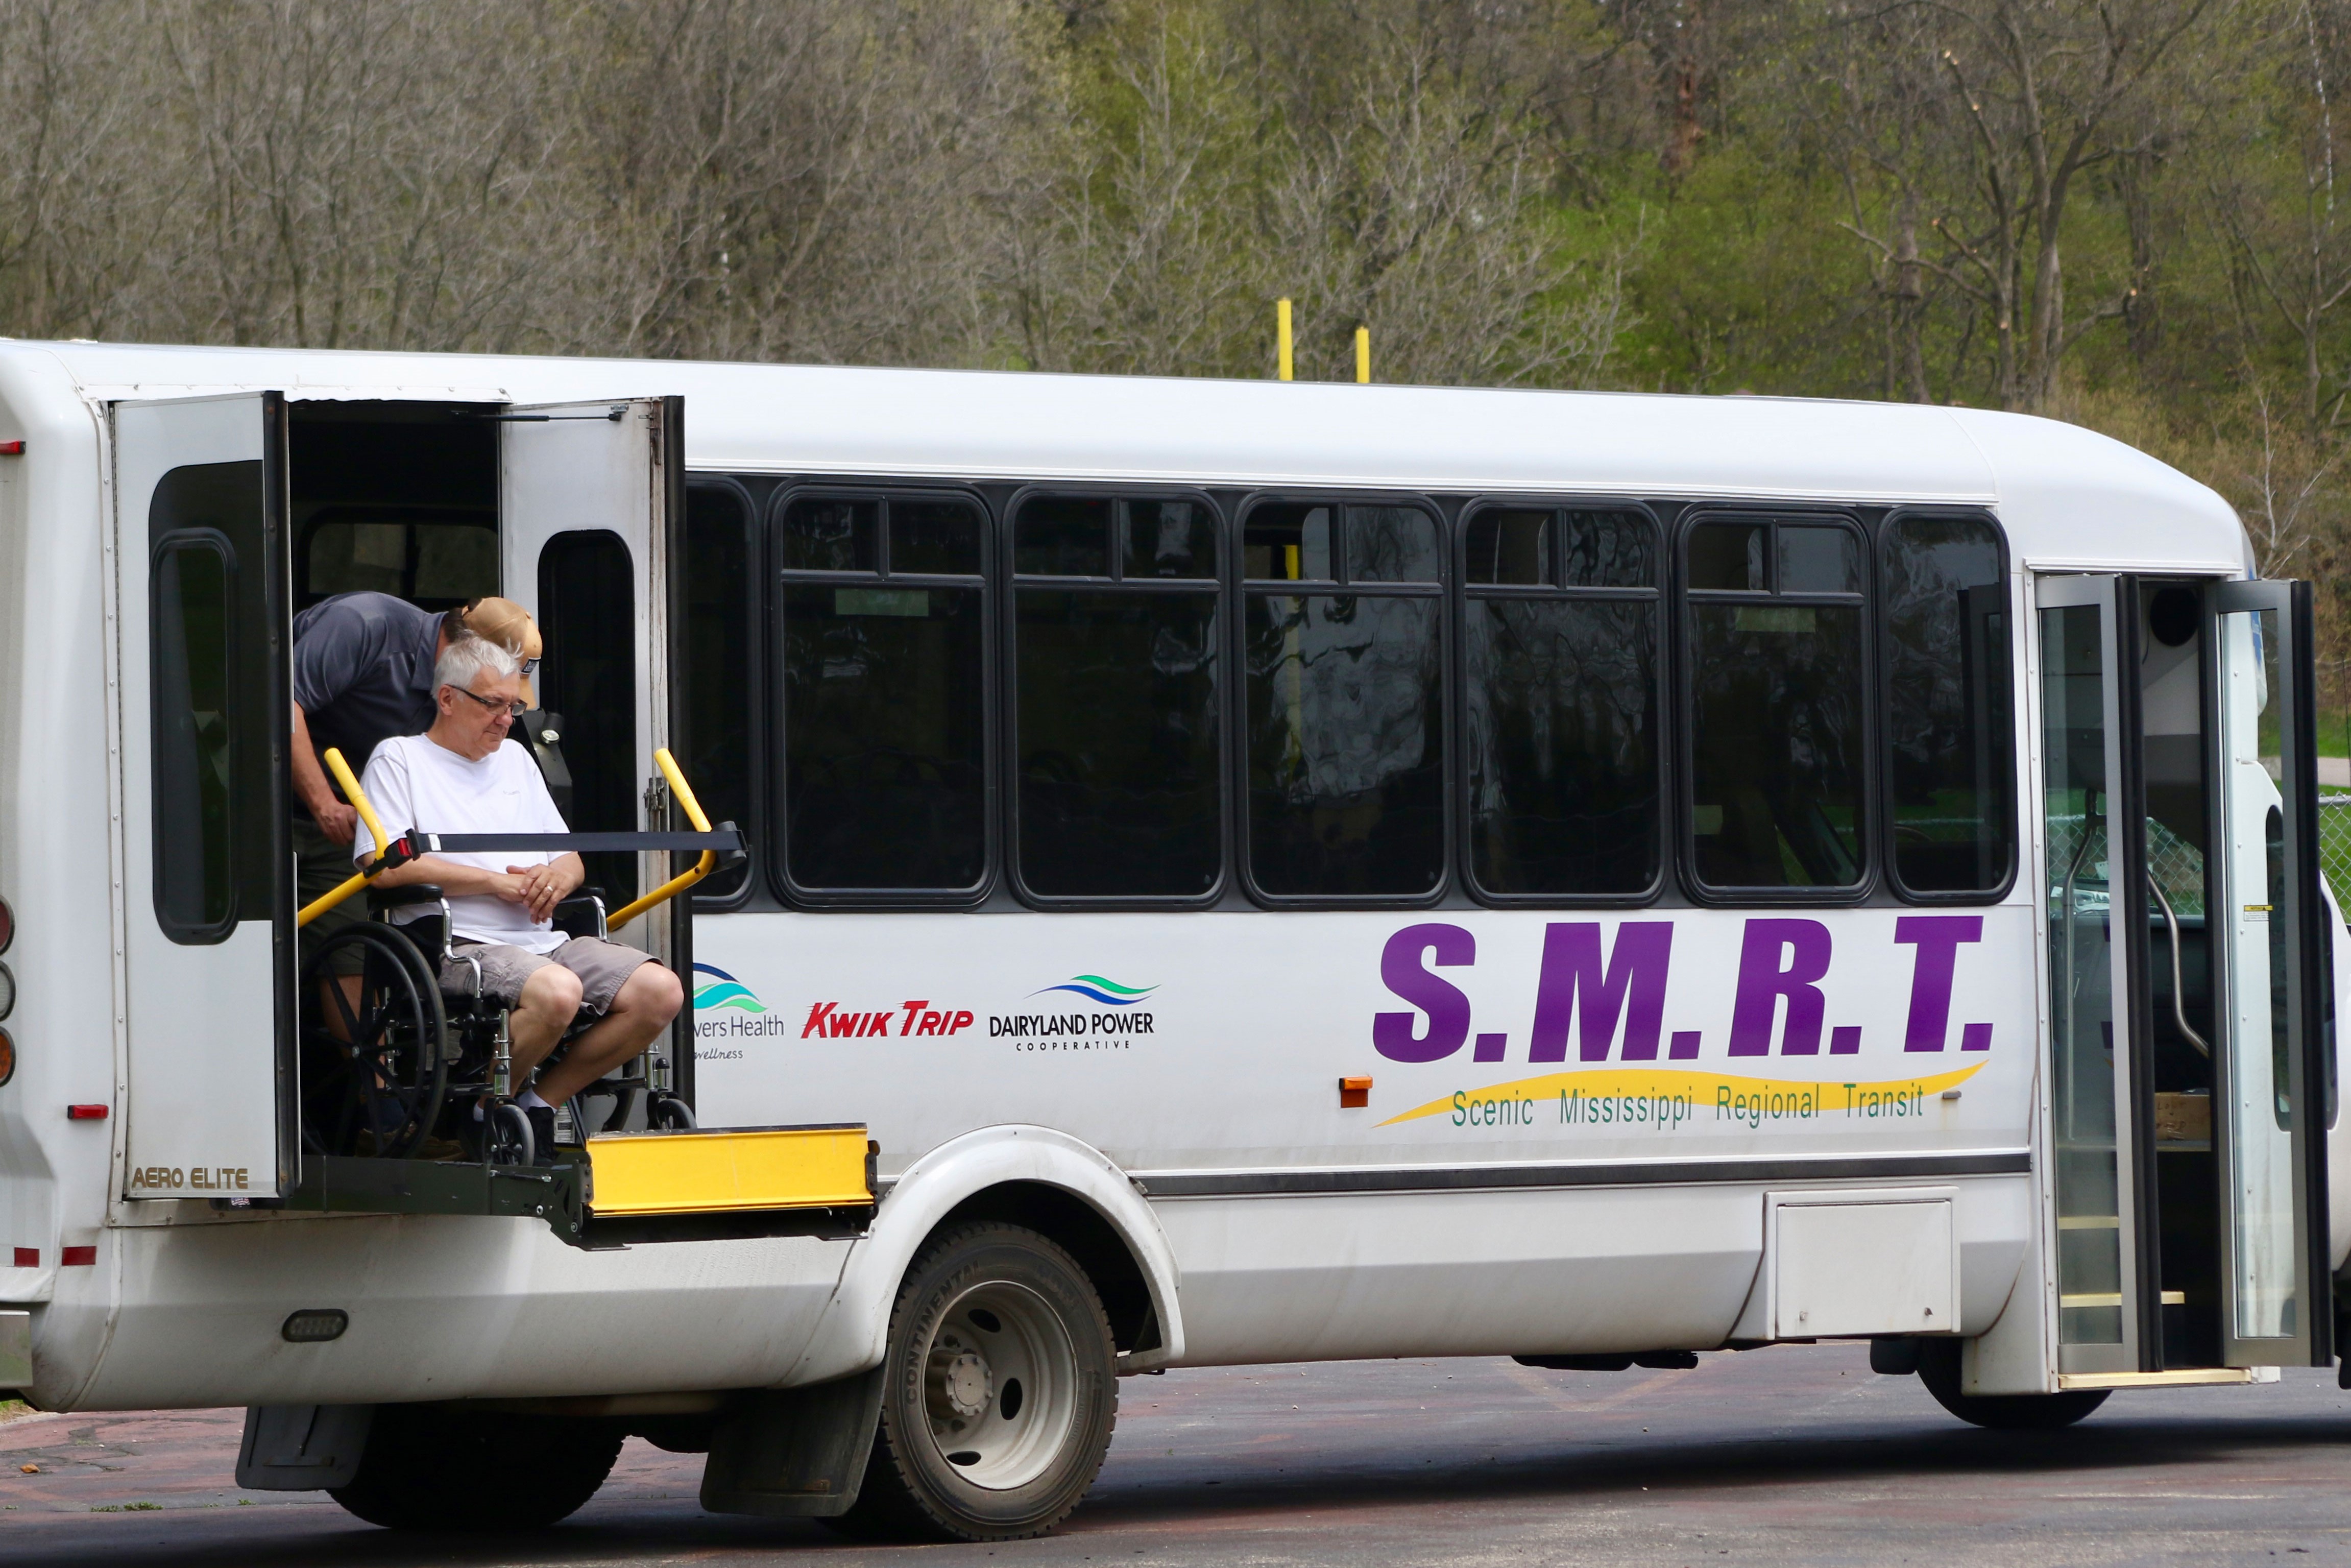 SMRT Bus's are for anyone and everyone!